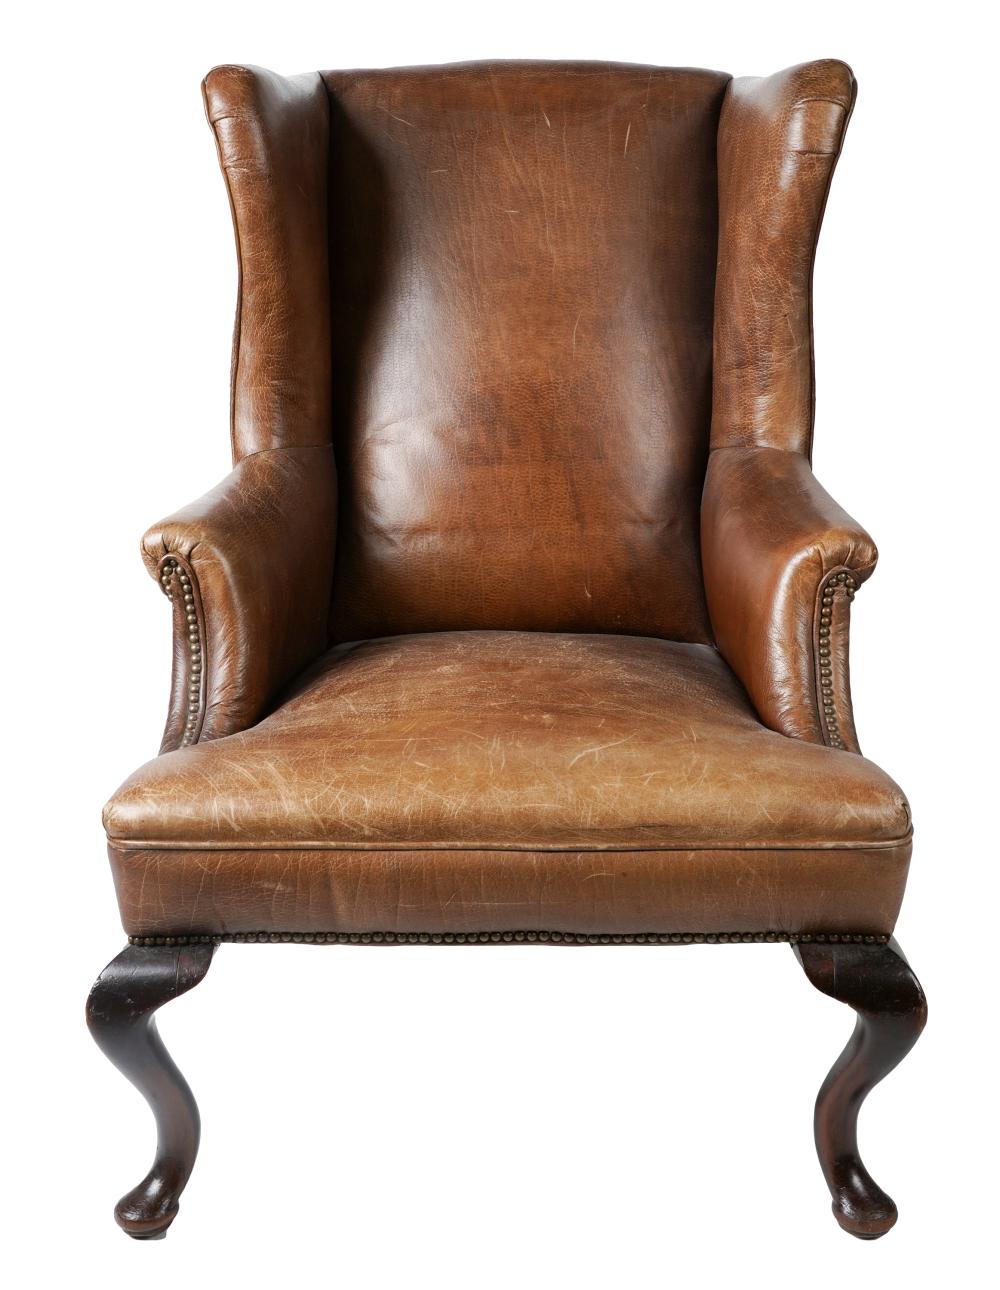 GEORGIAN STYLE LEATHER WING CHAIRwith 32e08d